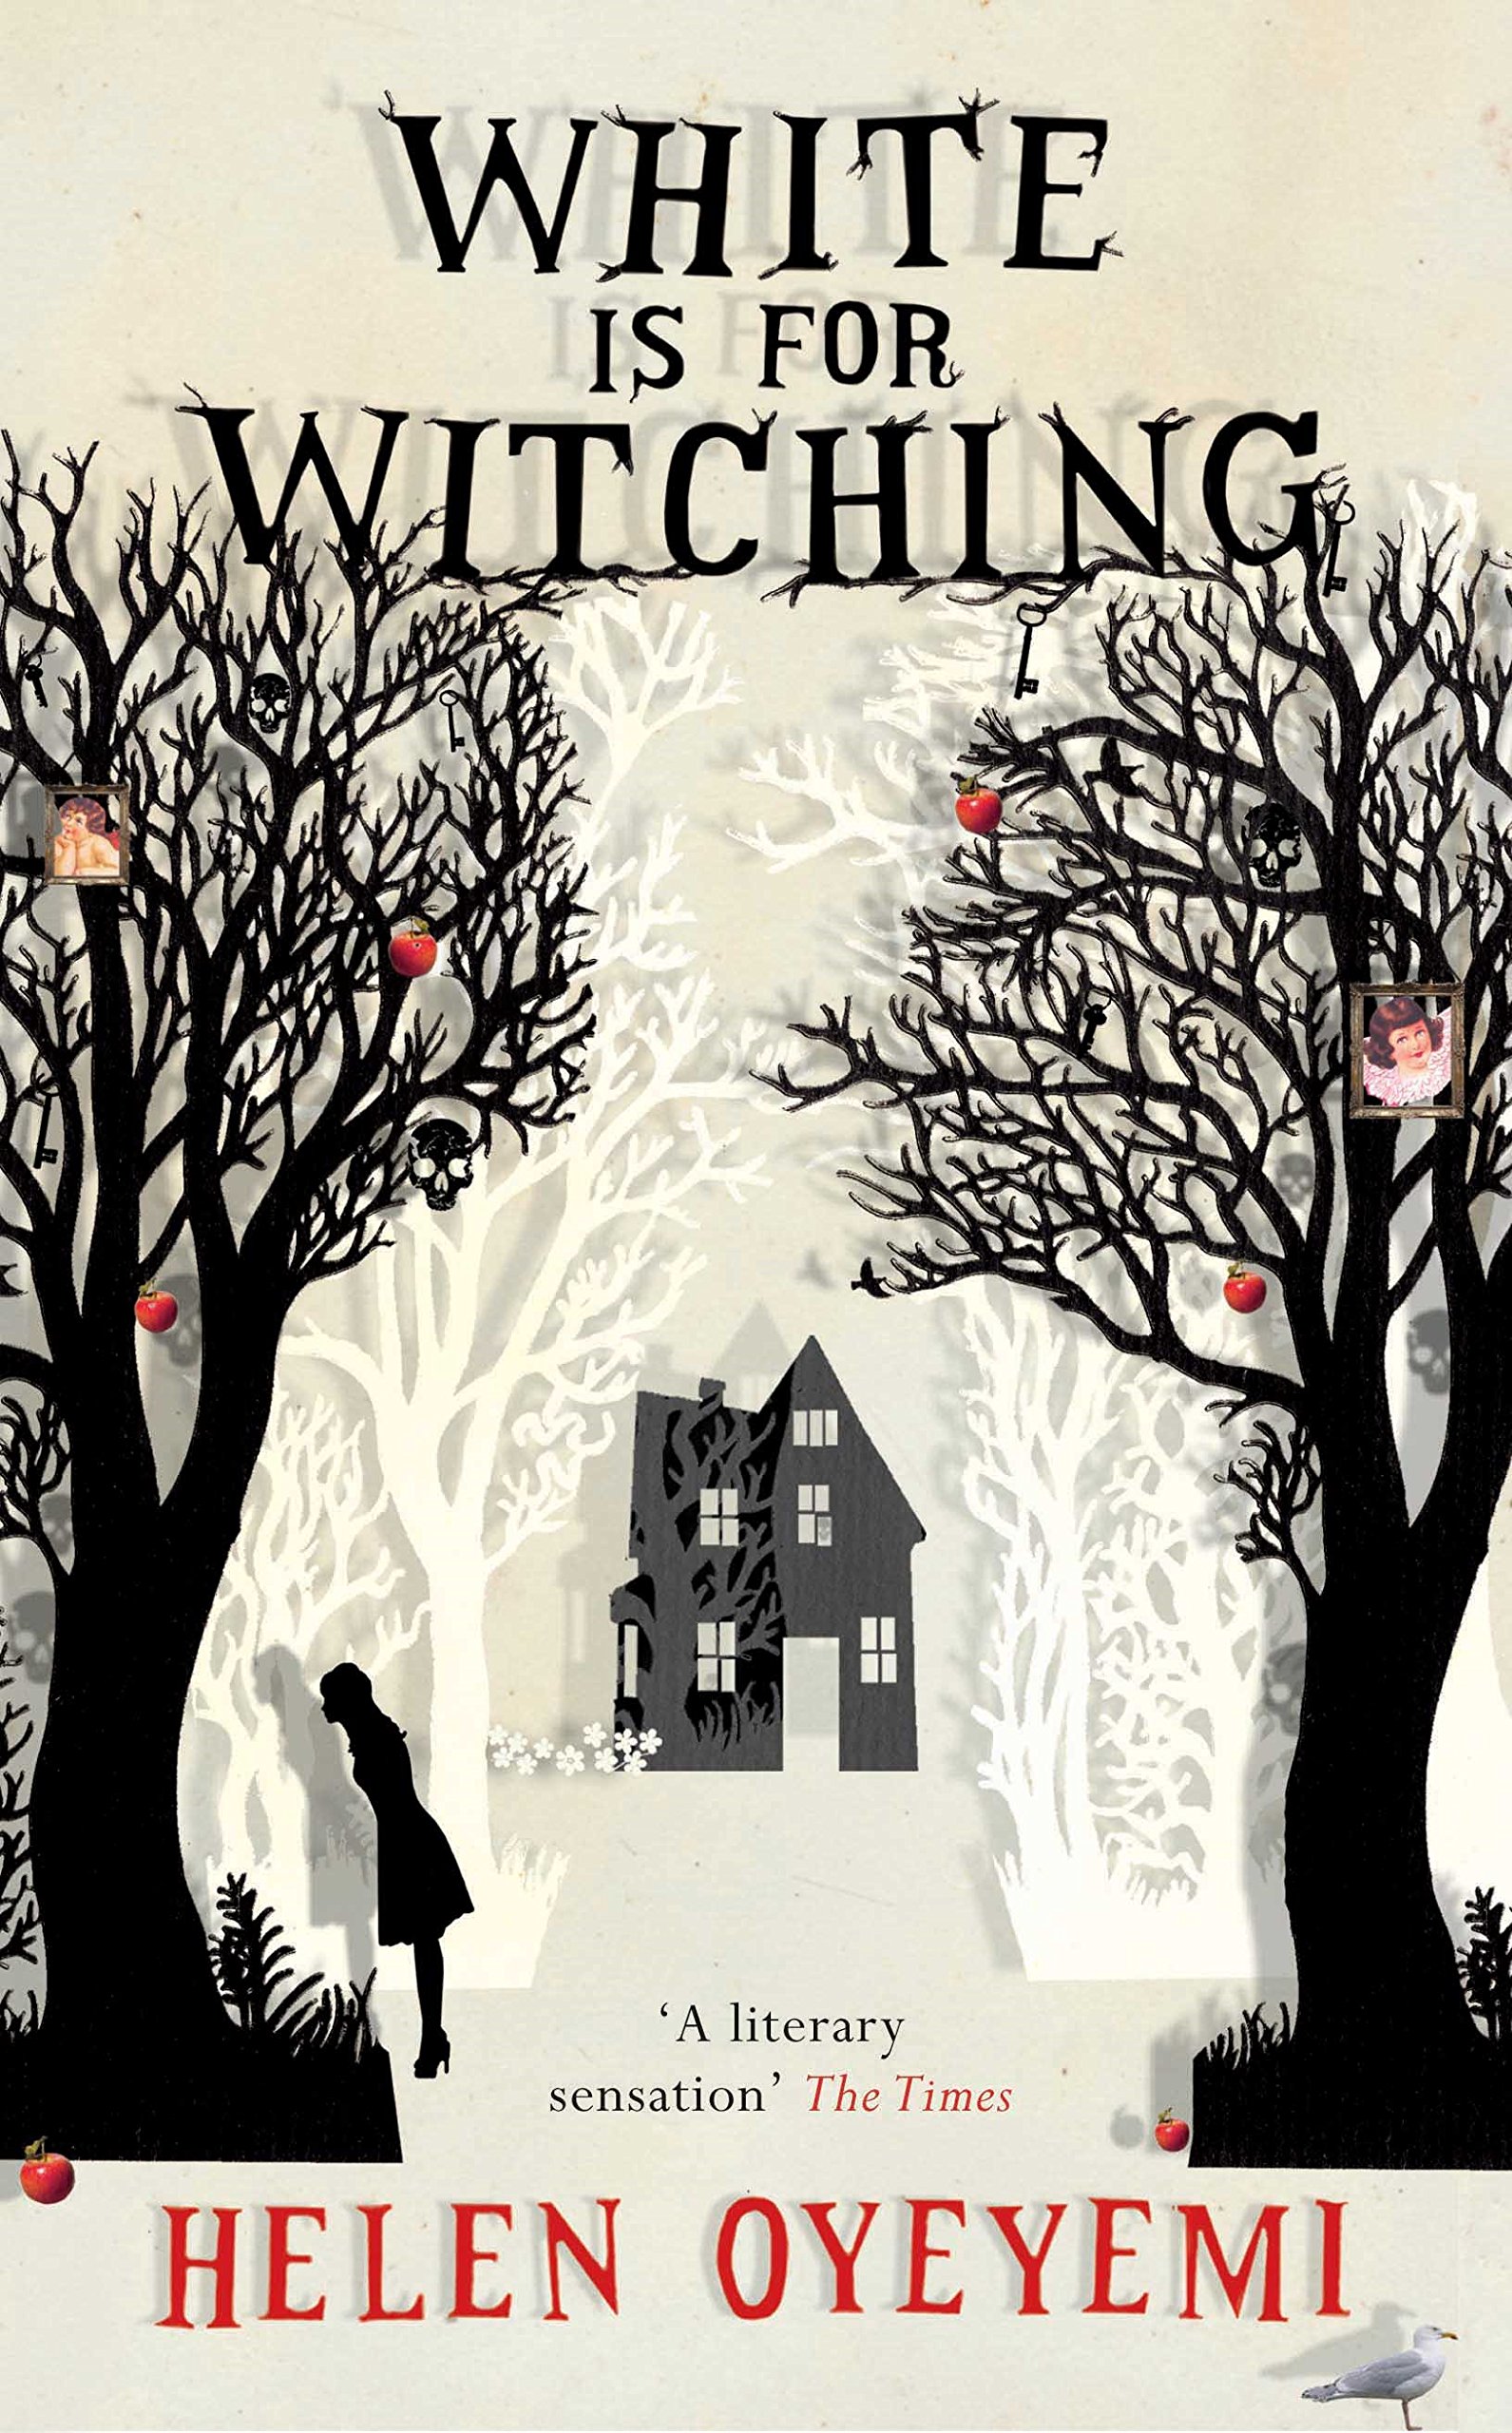 Cover of White is for Witching by Helen Oyeyemi